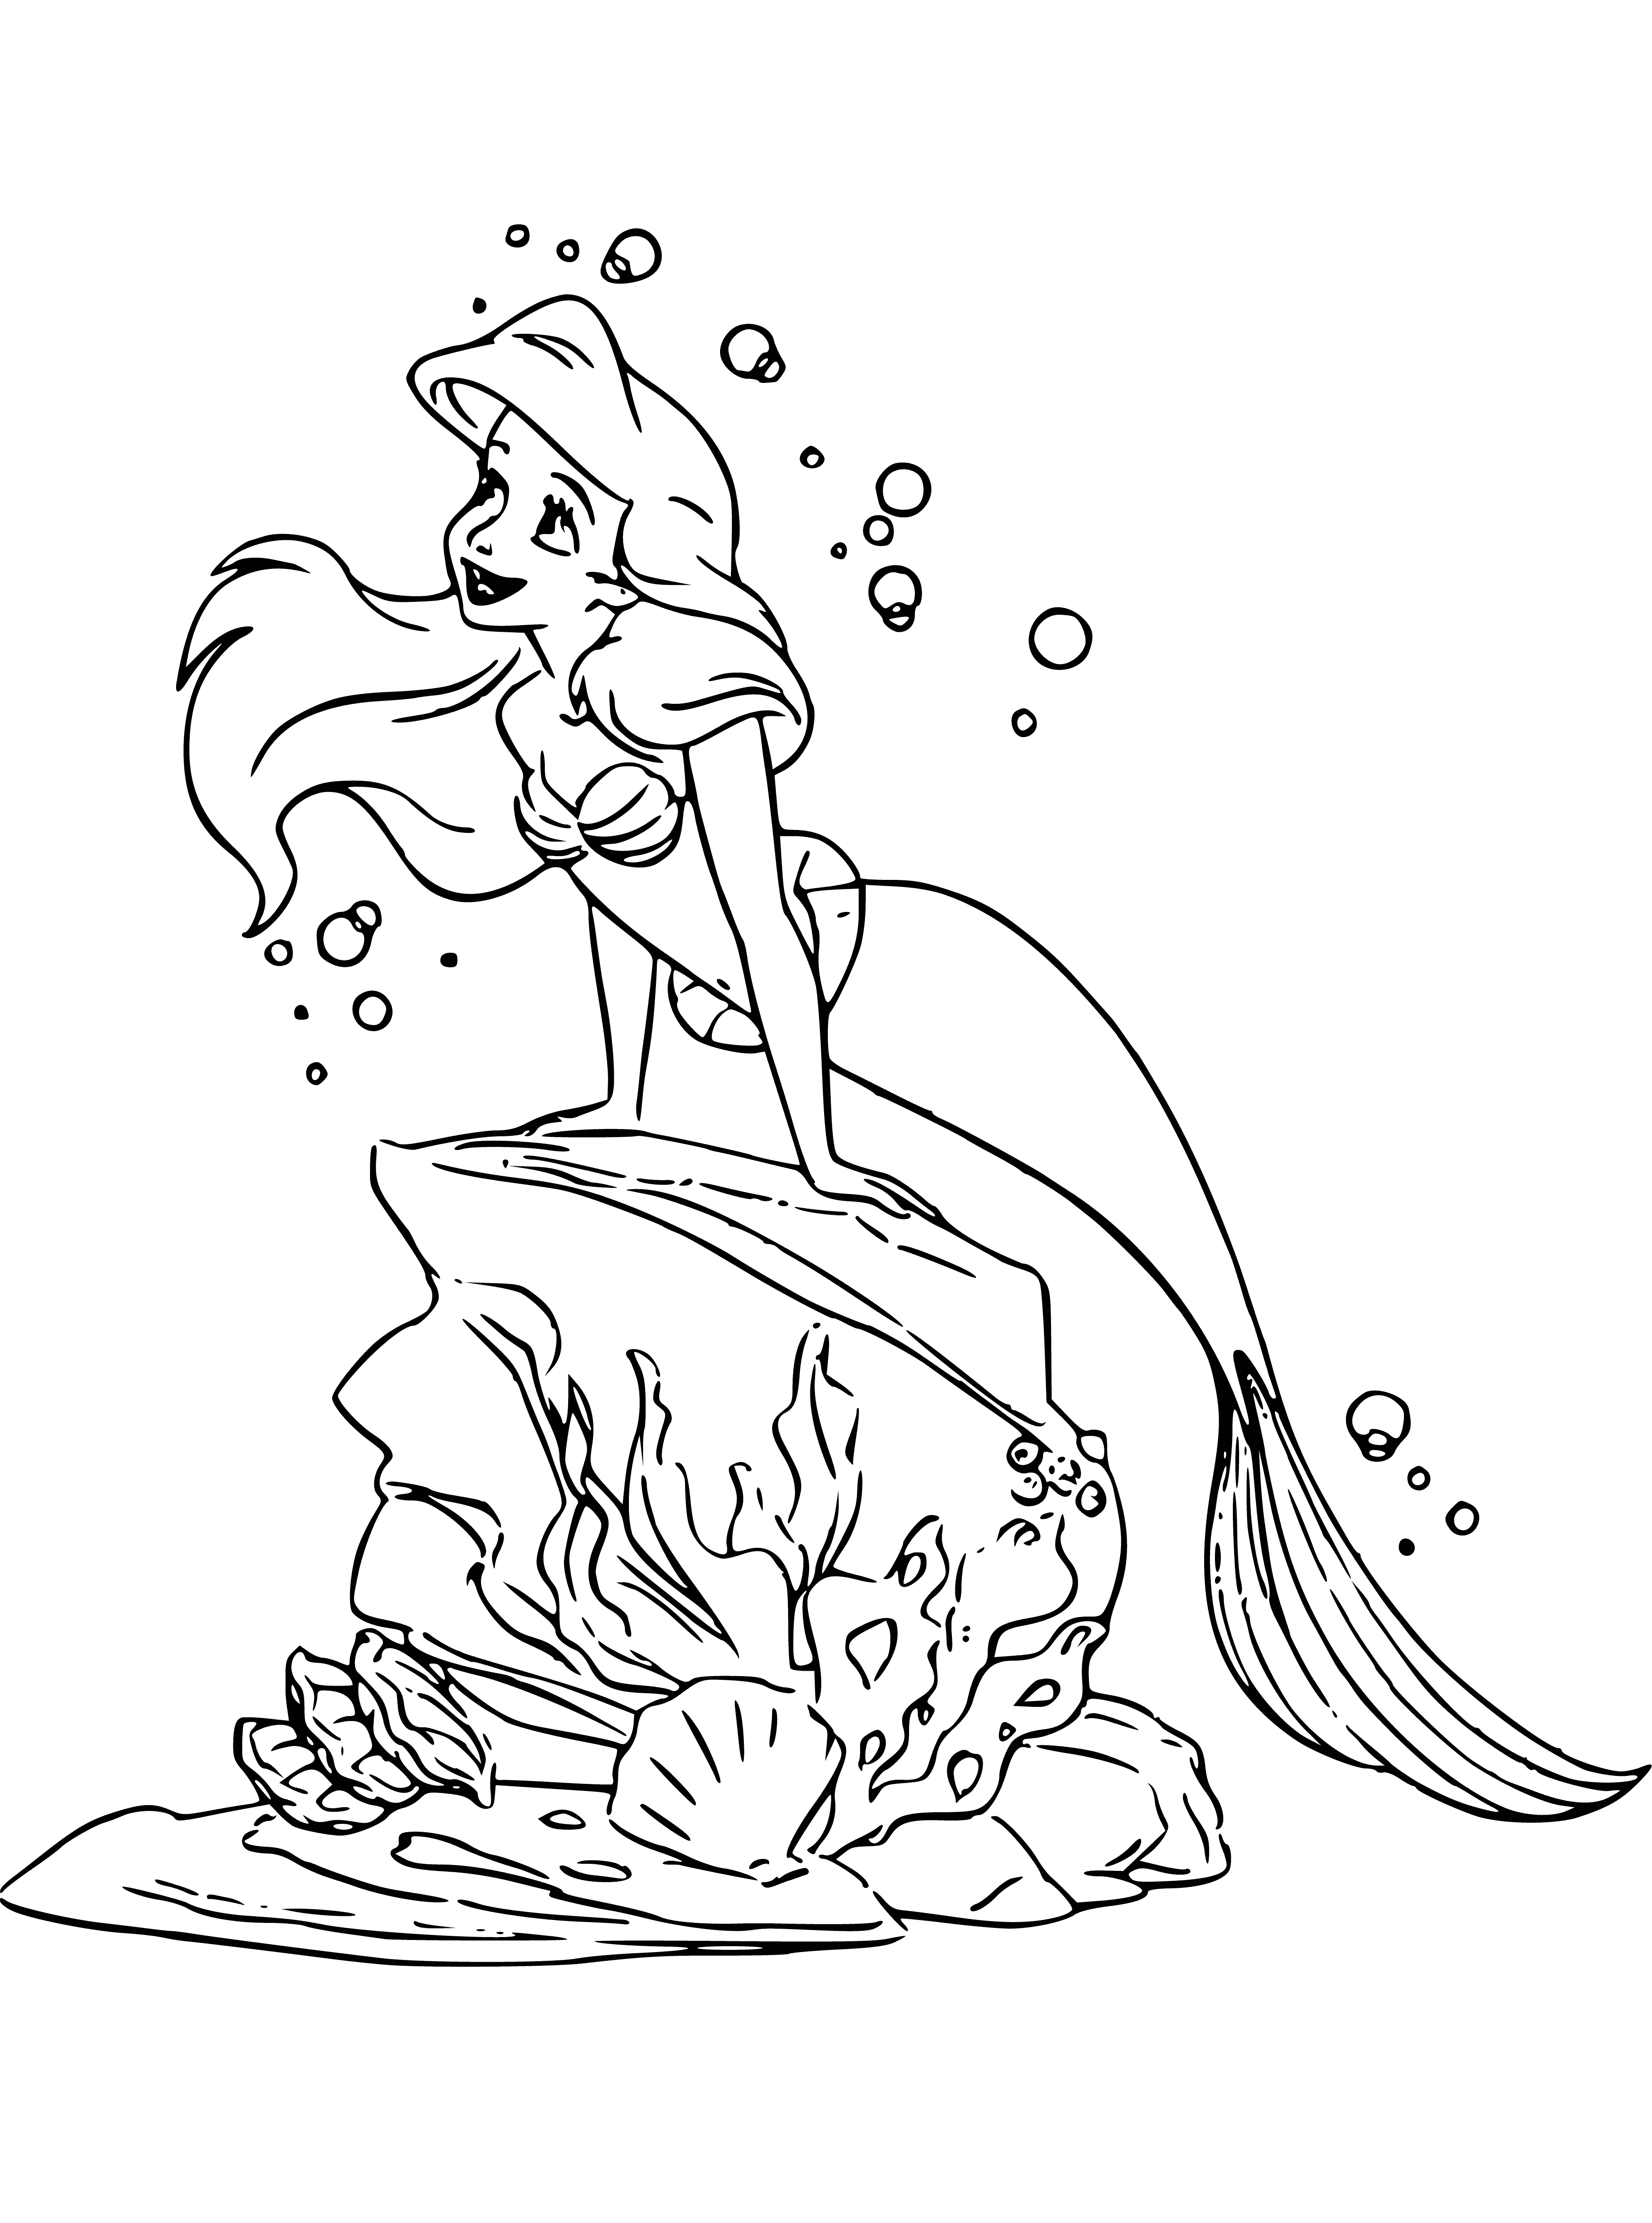 coloring page: A small mermaid sits, a sad expression on her face, red hair flowing and a green tail glistening in the water.